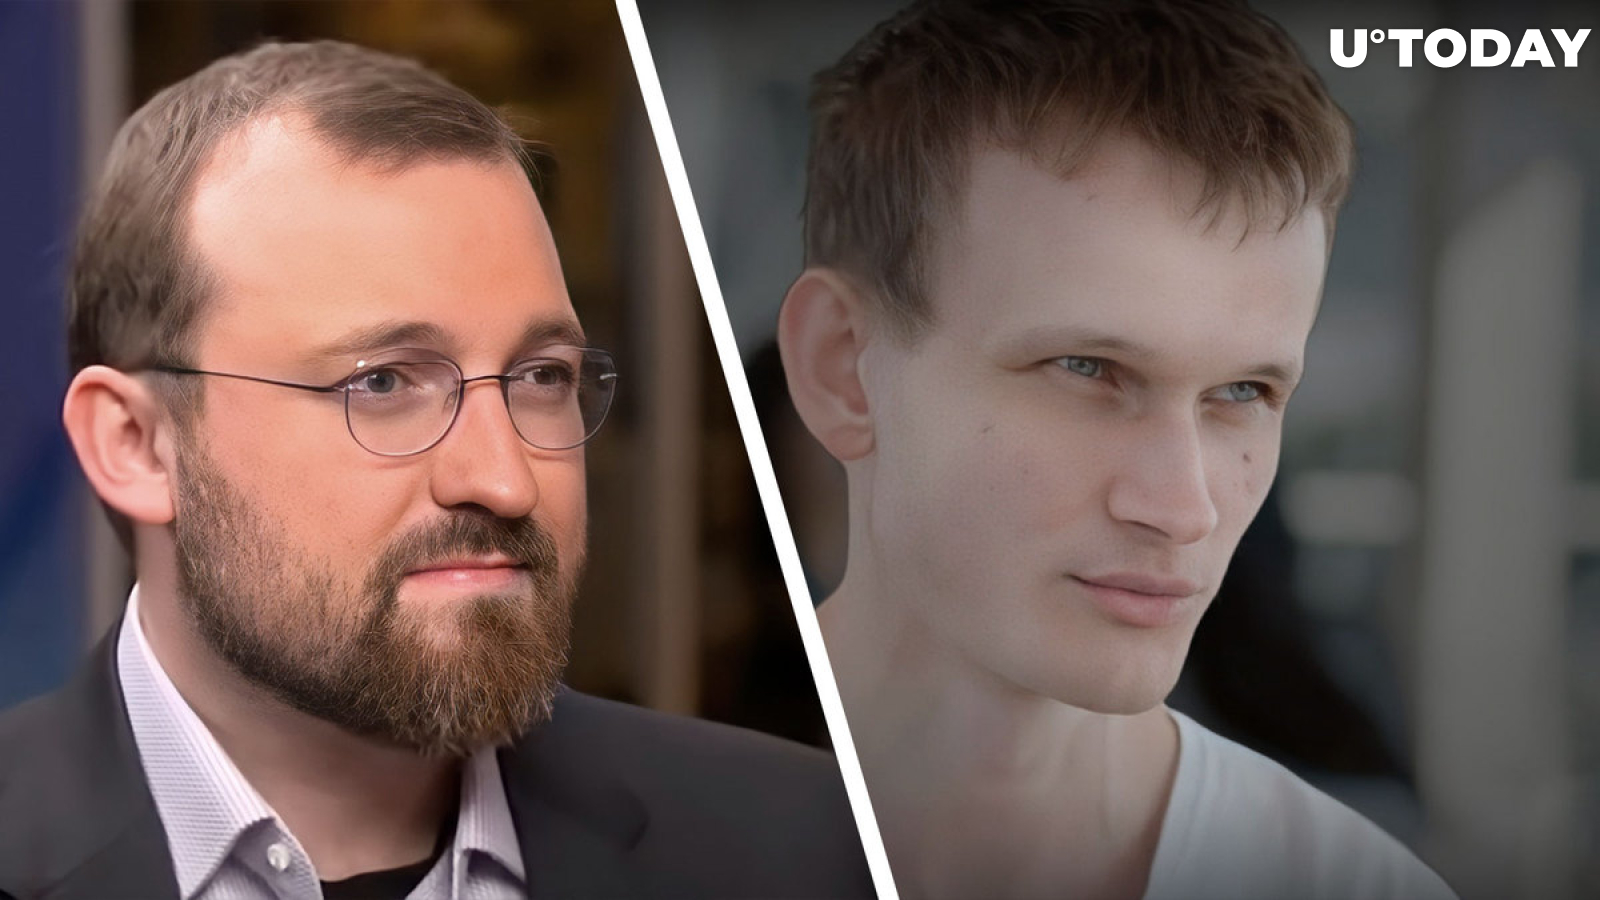 Cardano (ADA) Founder Says He Gets Confused for Vitalik Buterin, Here’s Why